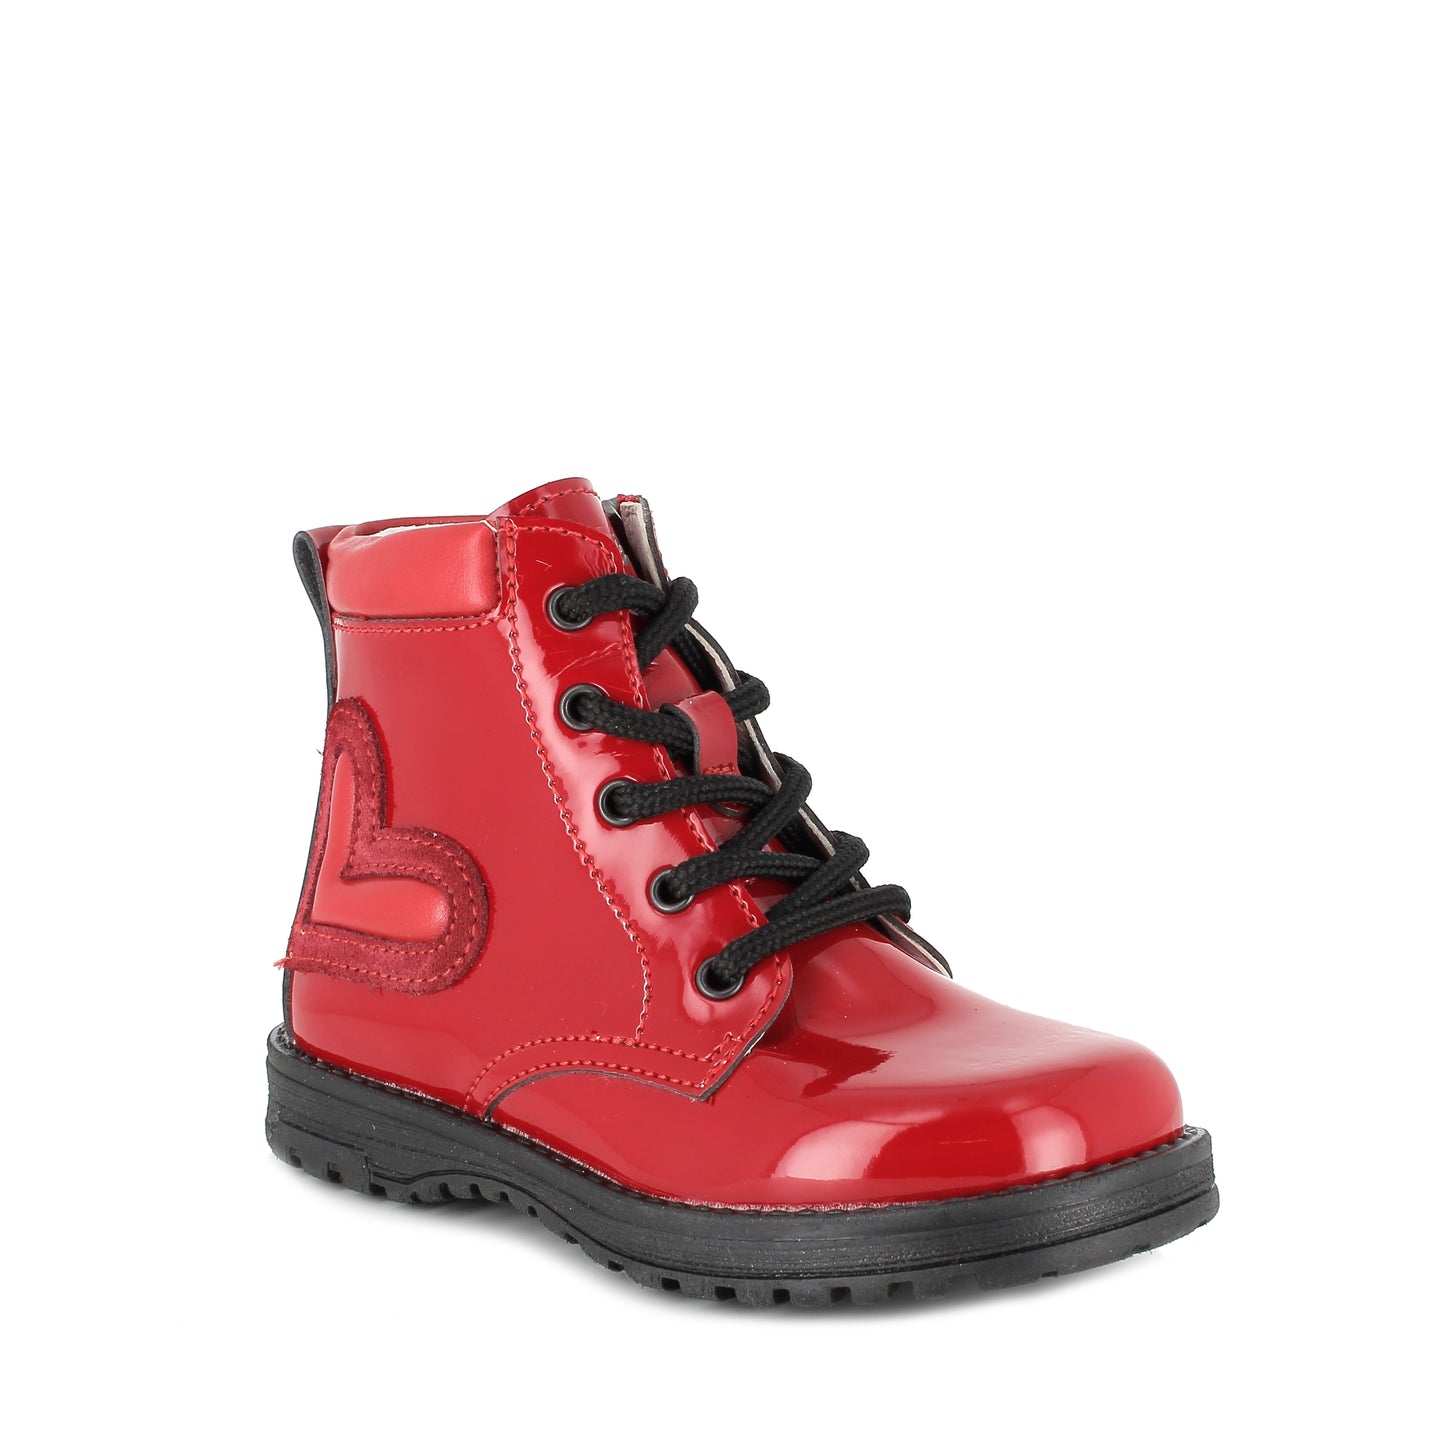 Primigi | 4912300 | Play Casual | Girls Lace/Zip Boot | Red Patent